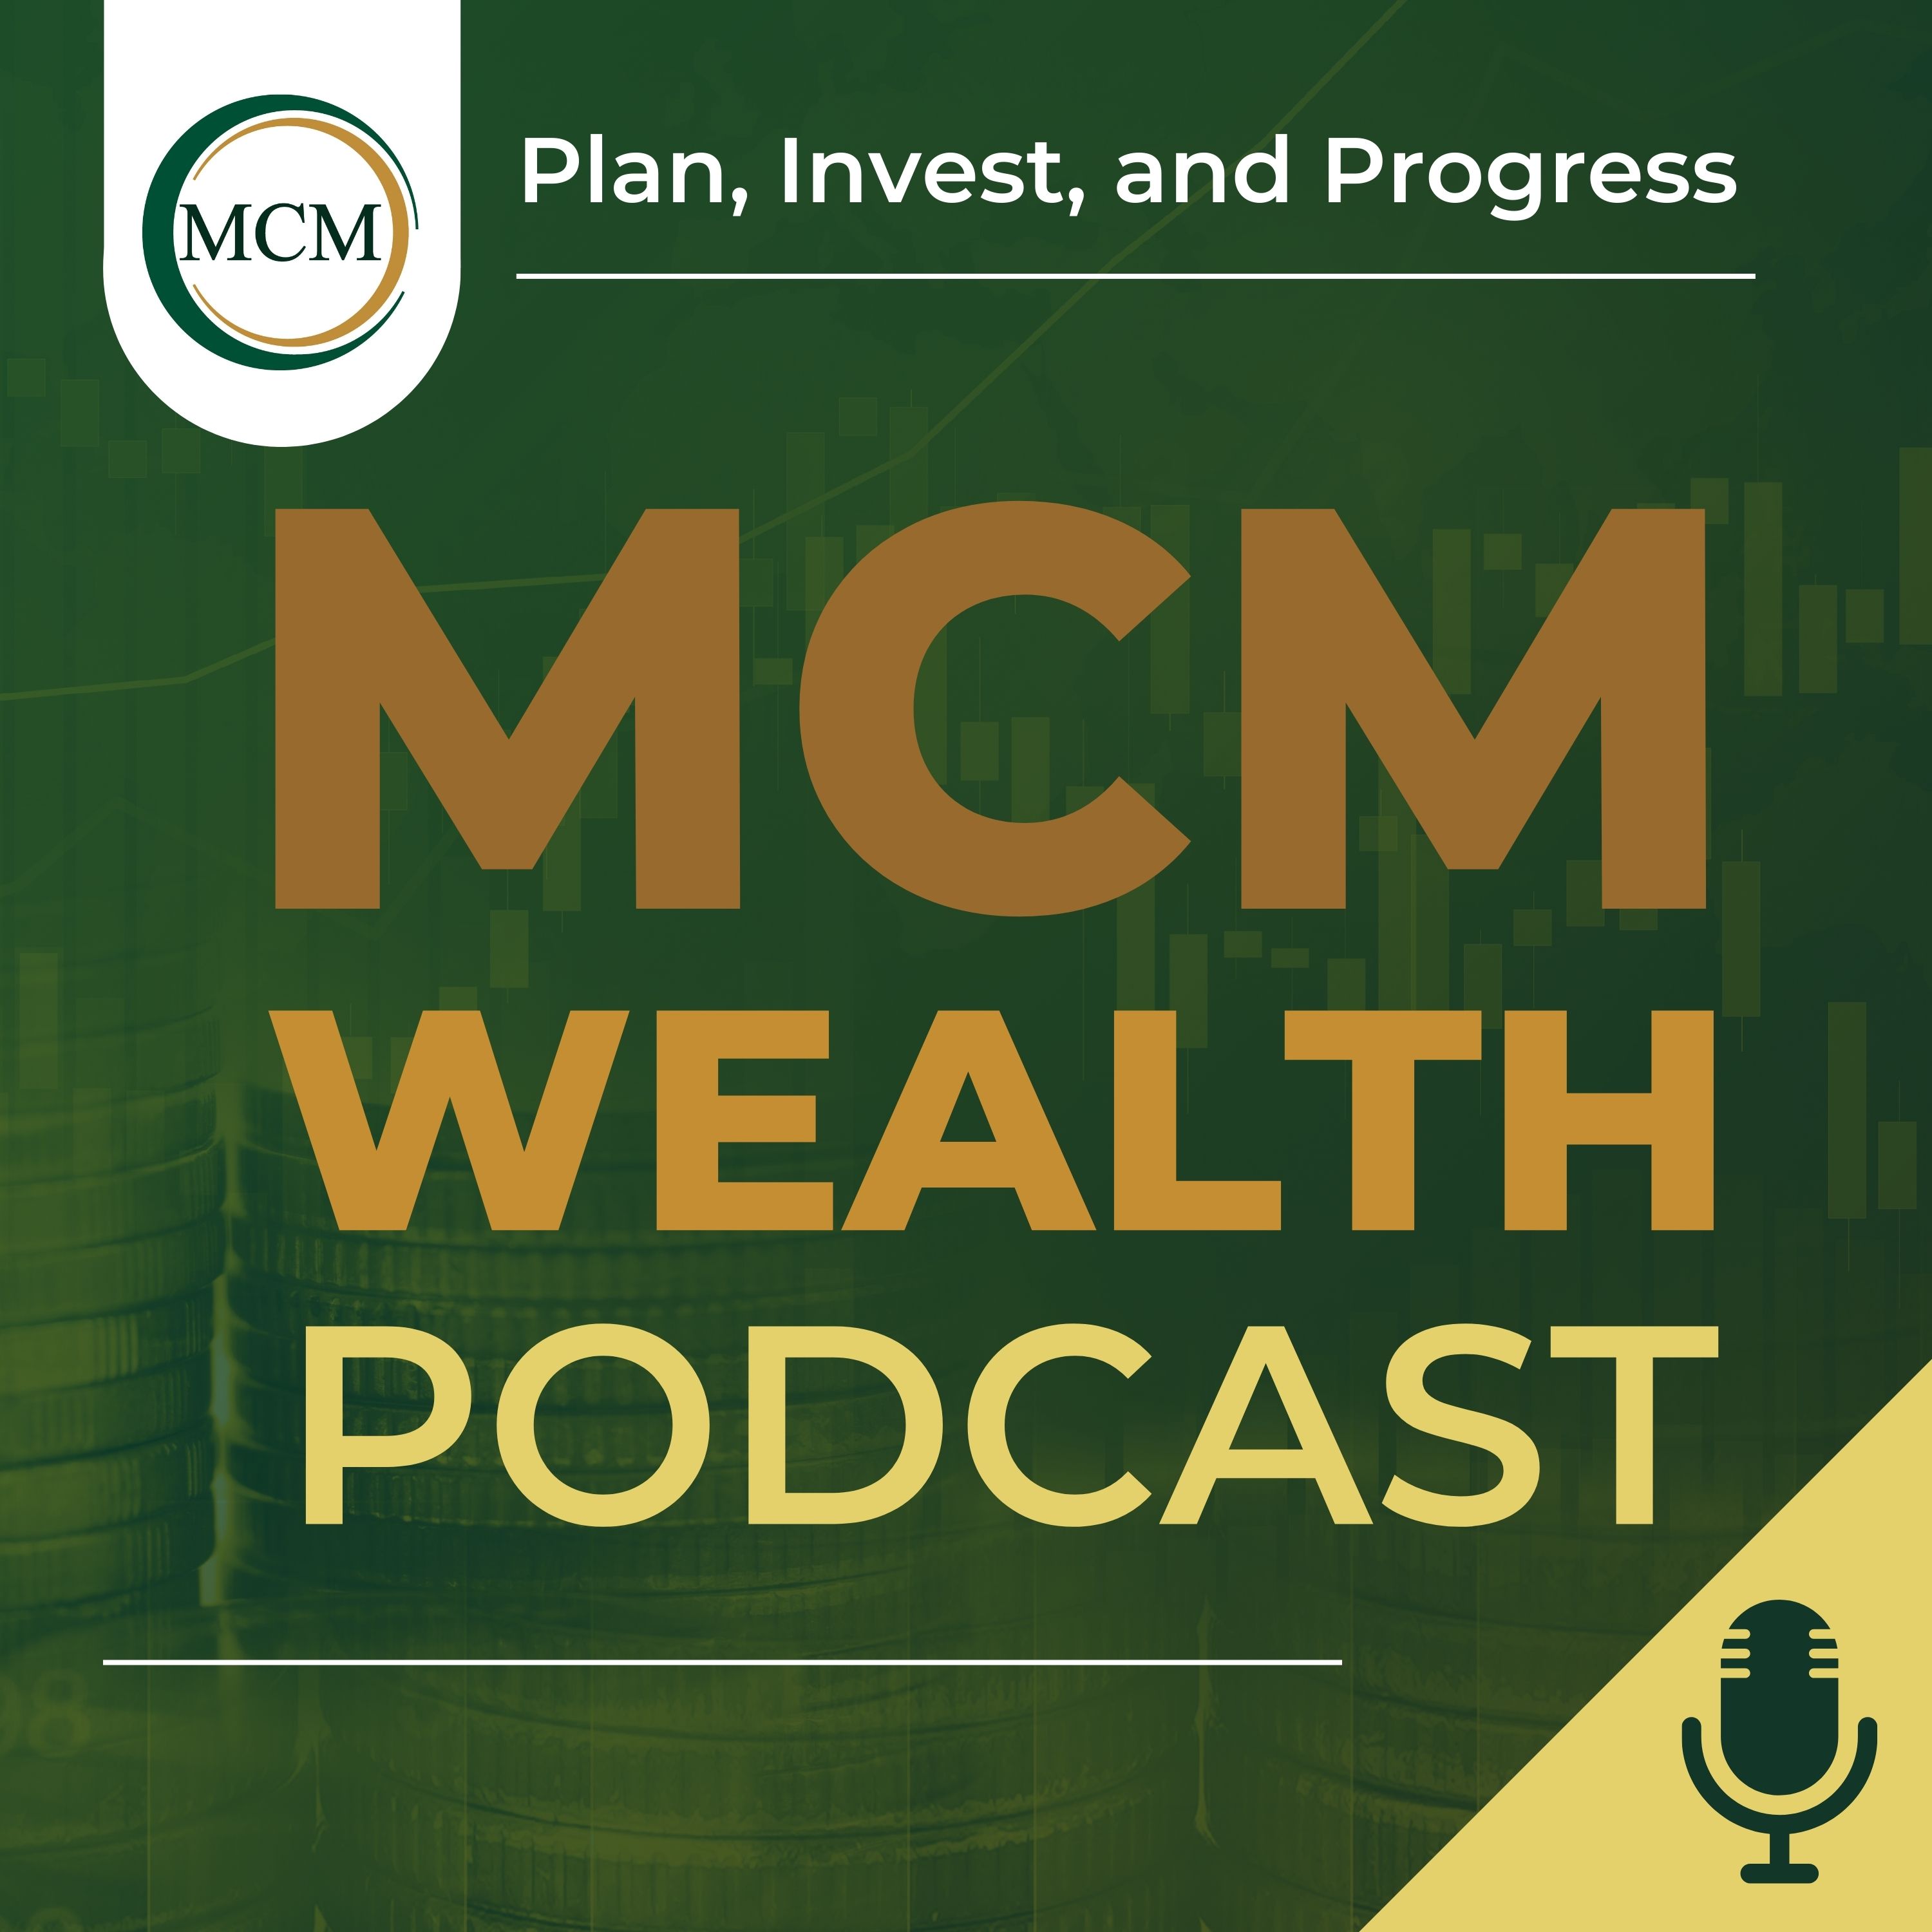 MCM Wealth Podcast: Plan, Invest and Progress